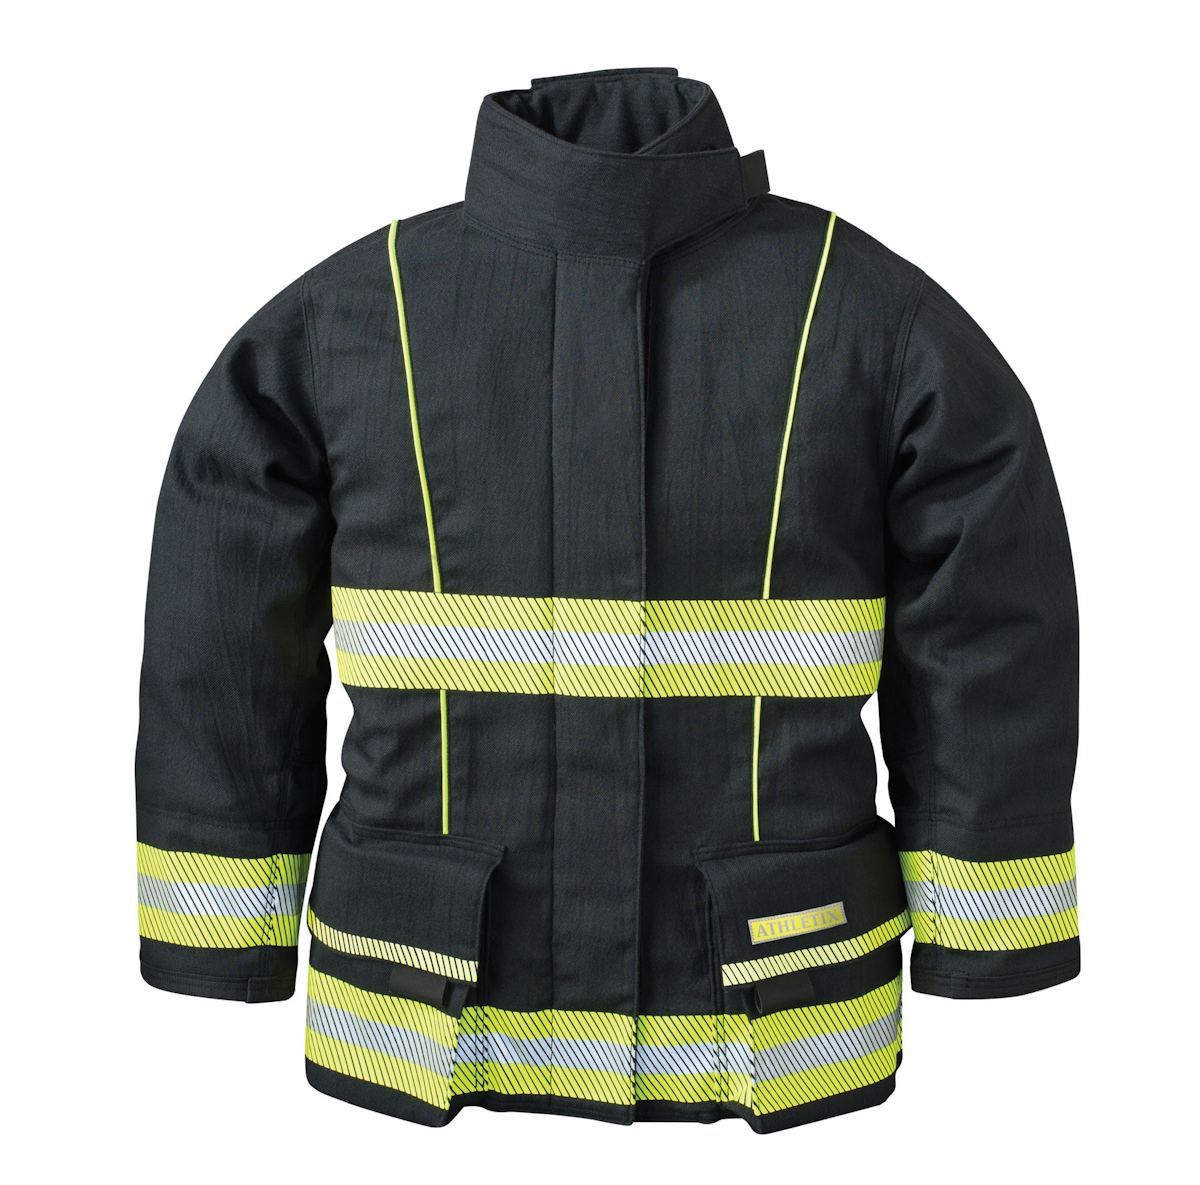 Product of the Day: Globe -- ATHLETIX Turnout Gear From: Firefighter ...